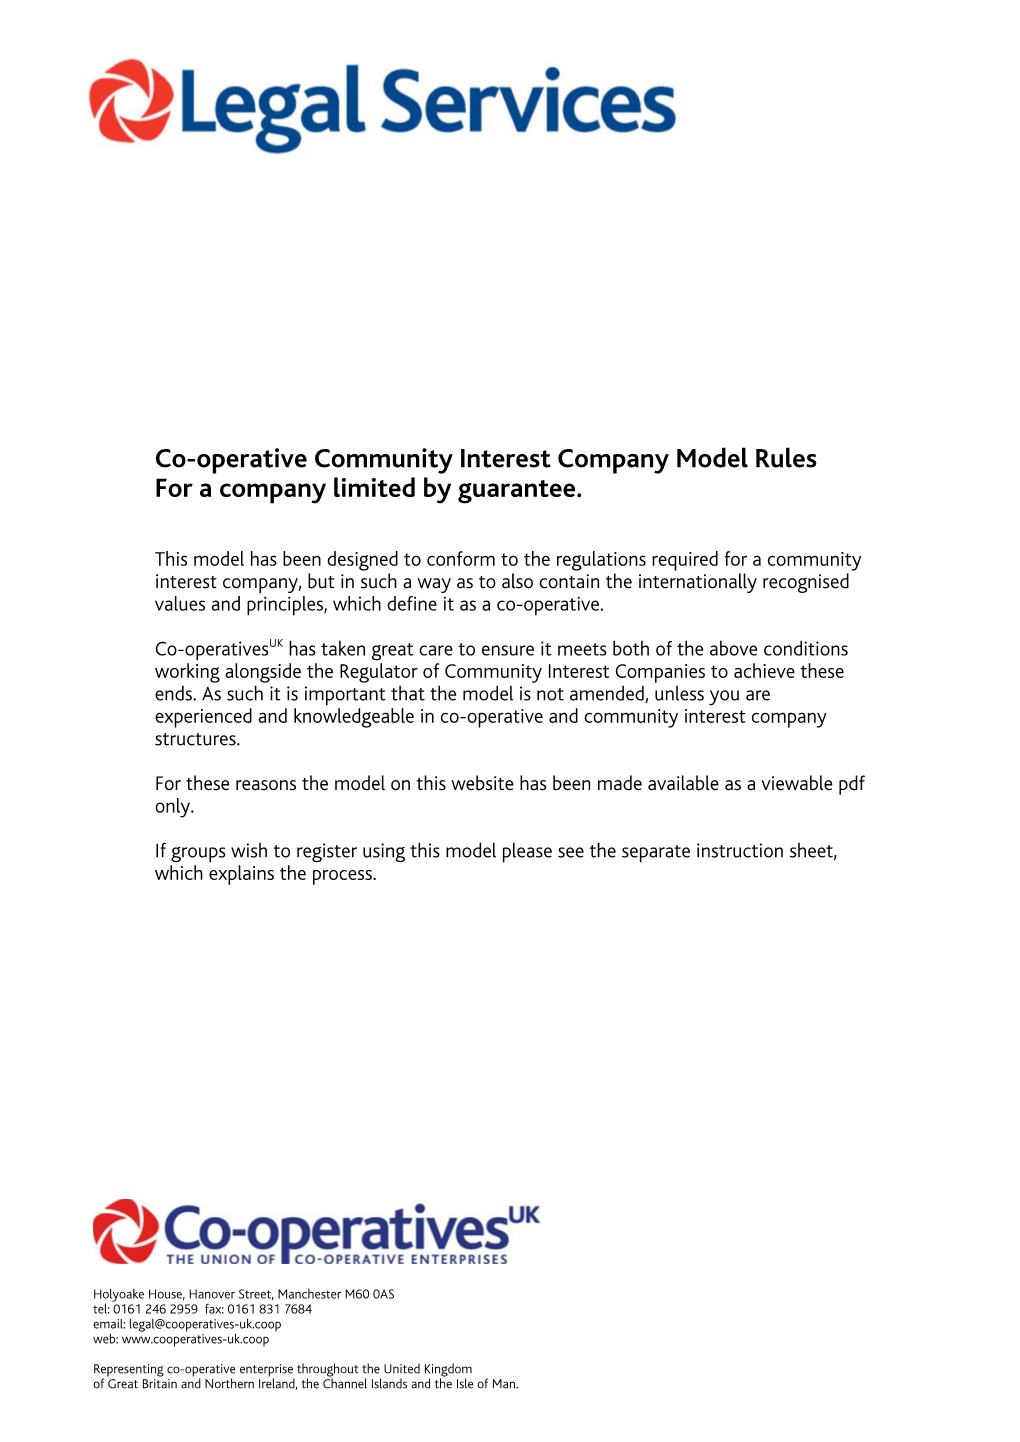 Co-Operative Community Interest Company Model Rules for a Company Limited by Guarantee